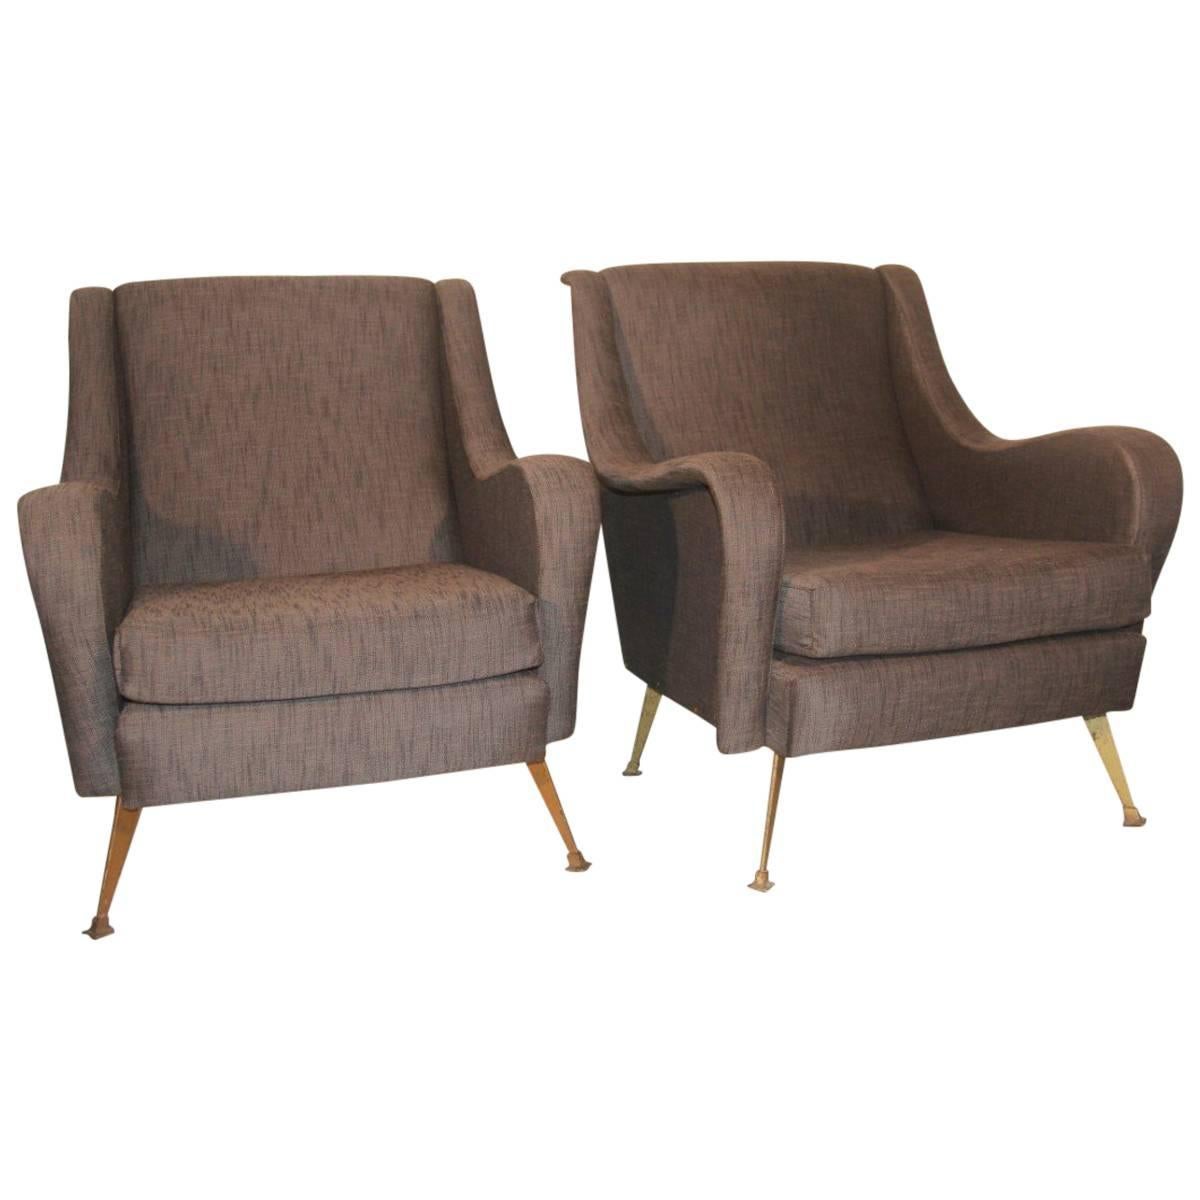 Pair of Mid-Century Italian Design Armchairs Marco Zanuso Style For Sale